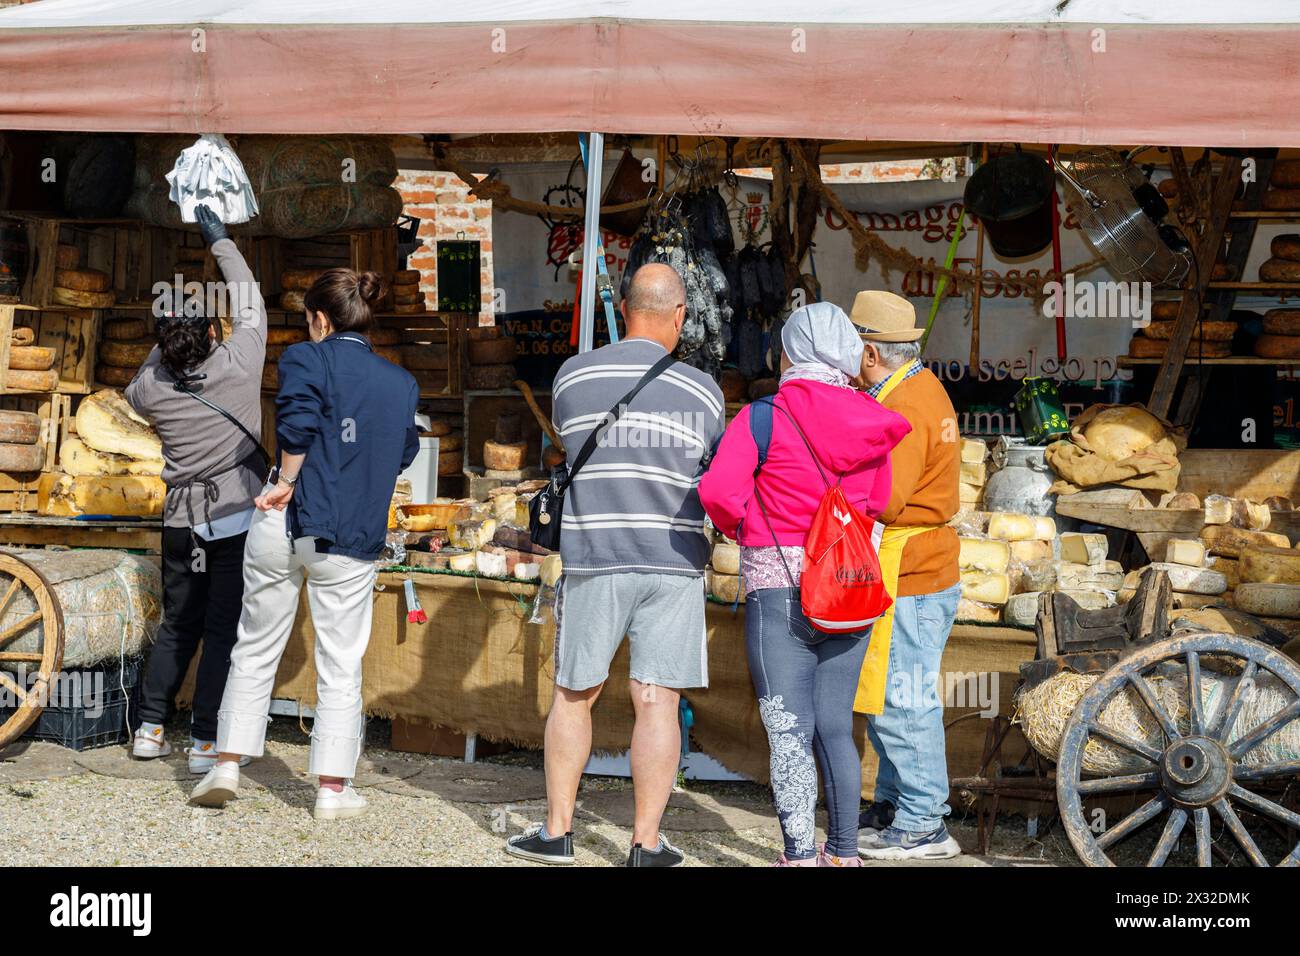 Moncalieri, Piedmont, Italy - April 20, 2024: Customers in front of a market stall selling artisanal cheeses and cured meats. Stock Photo